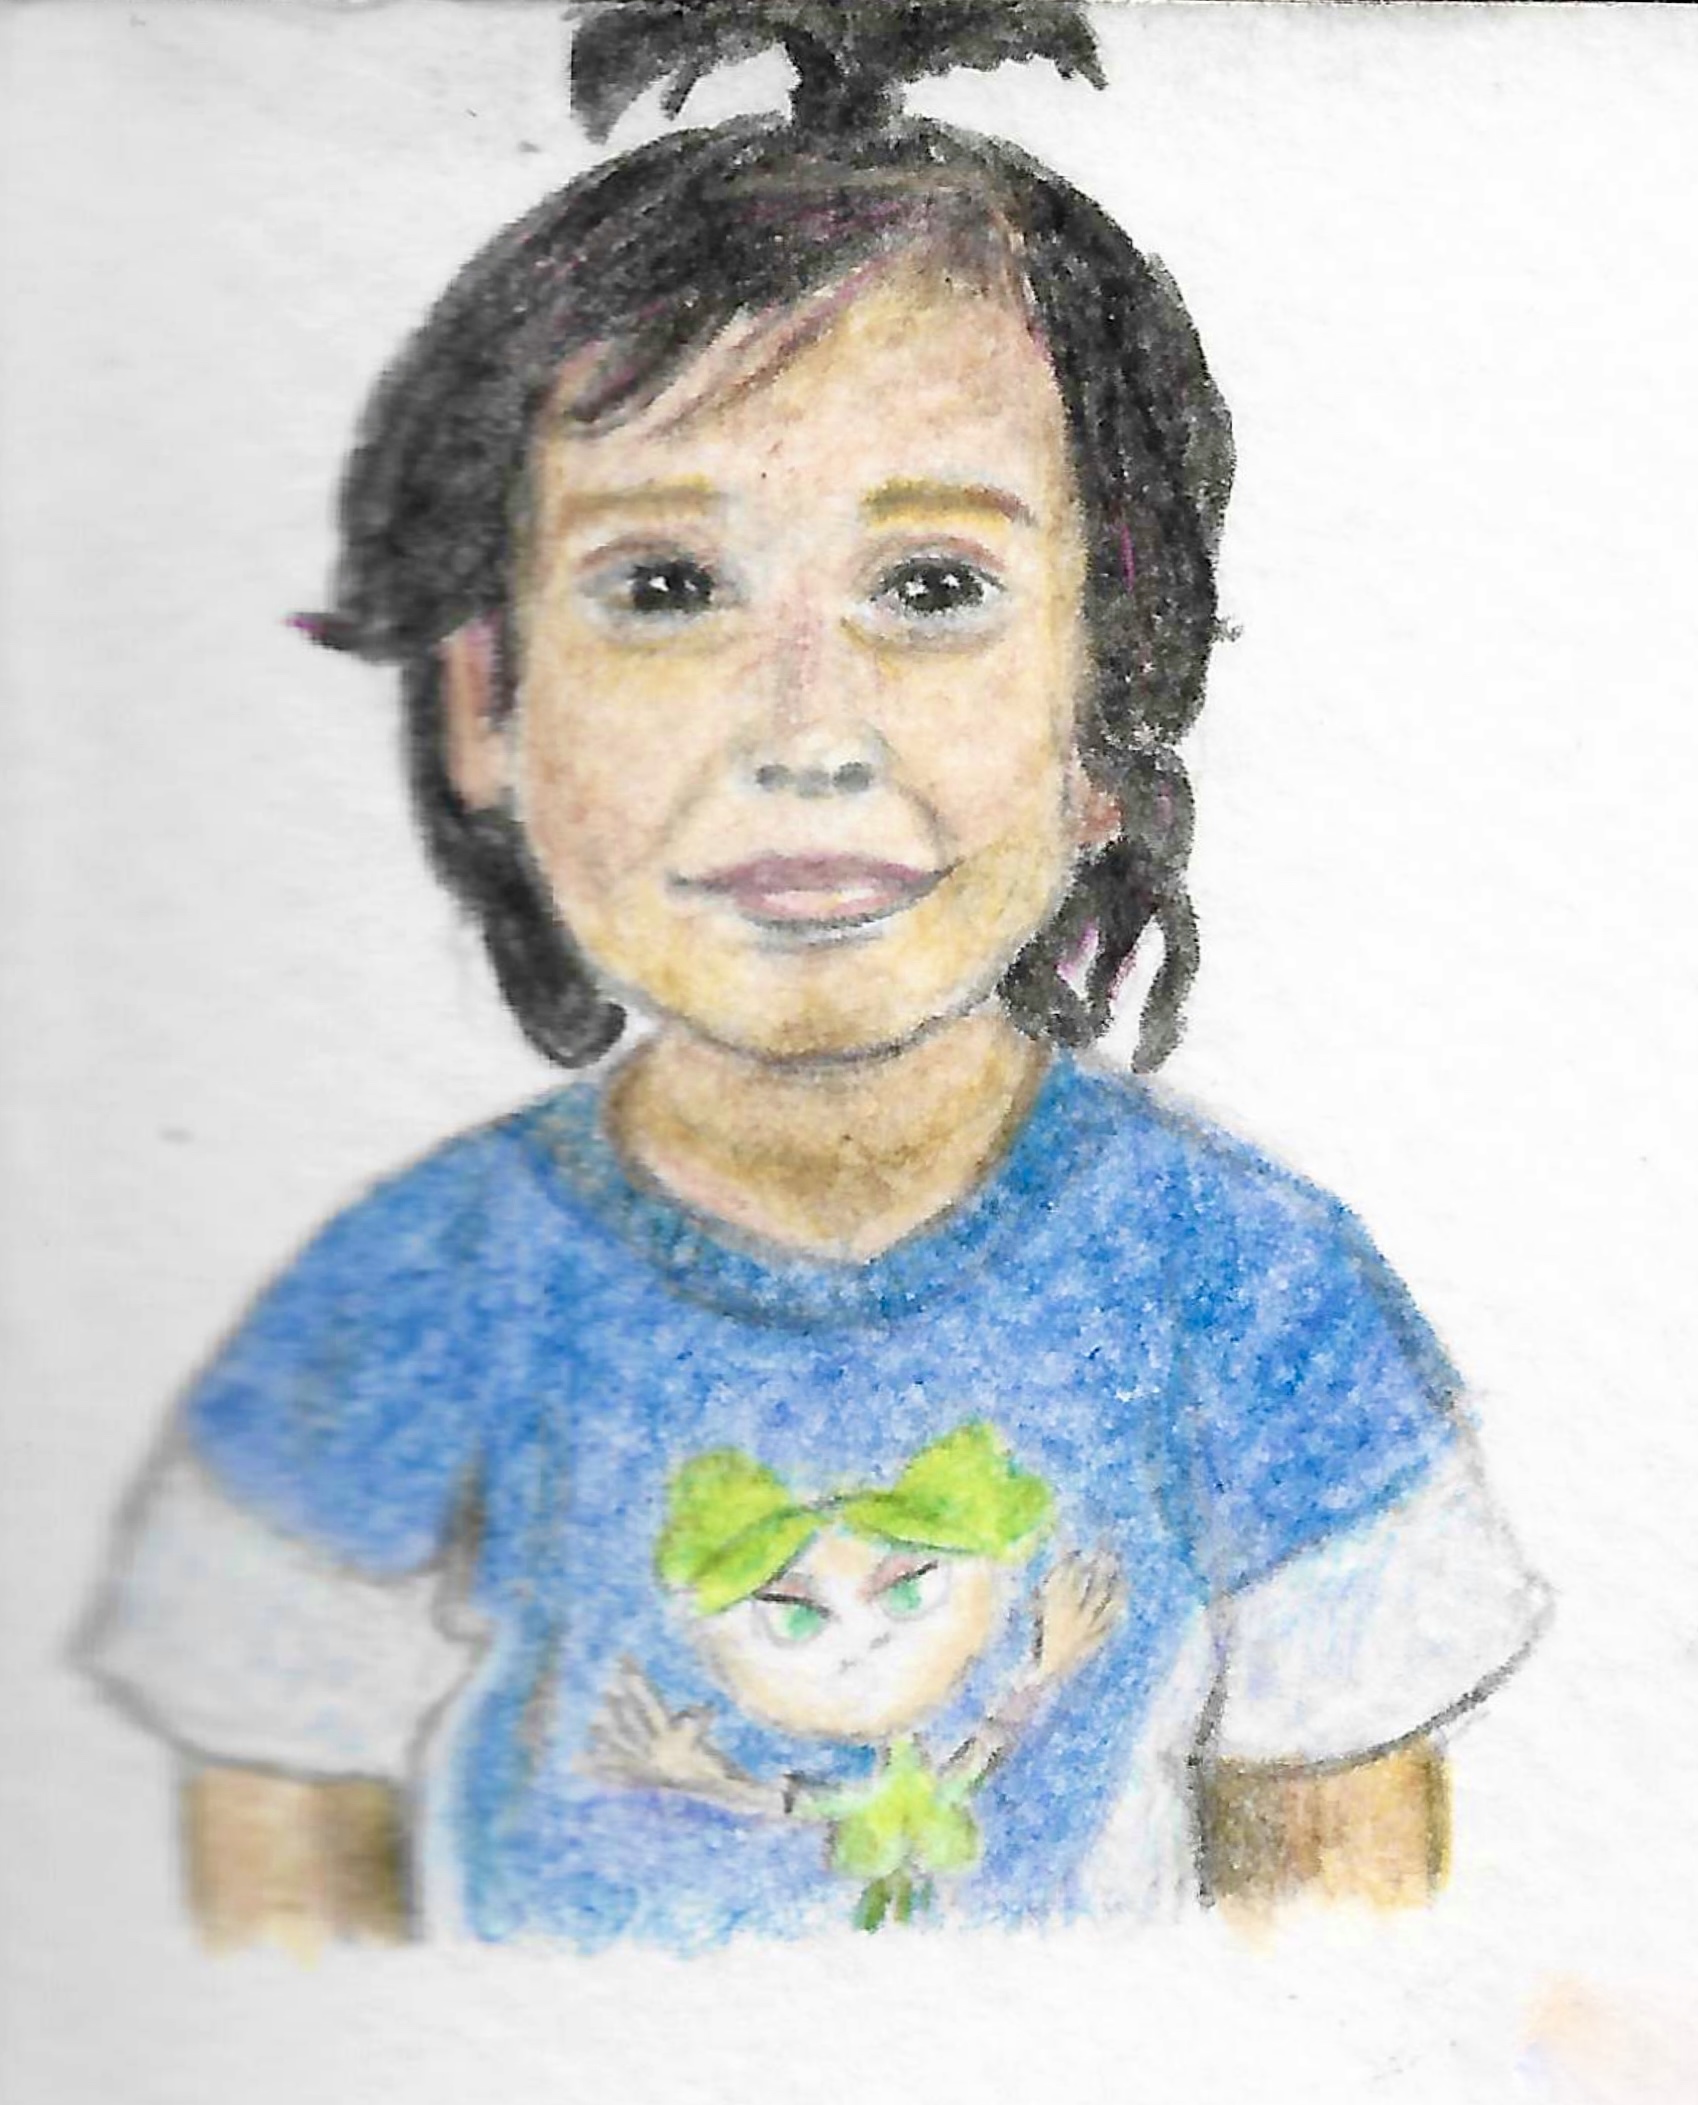 colour pencil drawing of me as a baby